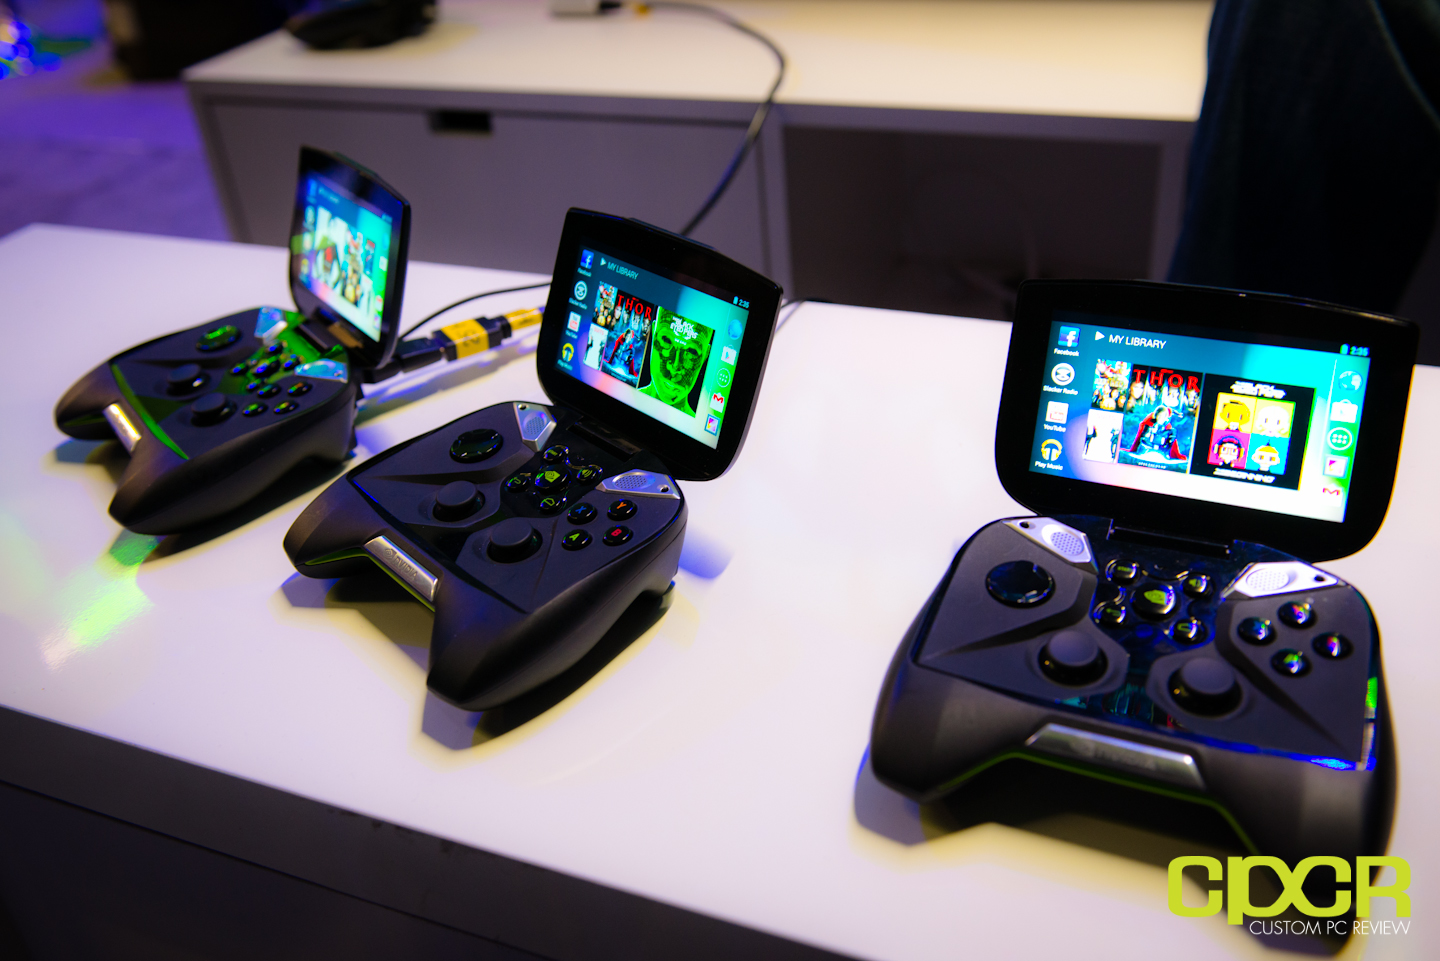 CES 2013: Nvidia Tegra 4, Project SHIELD Gaming Console Hands On, First Impressions